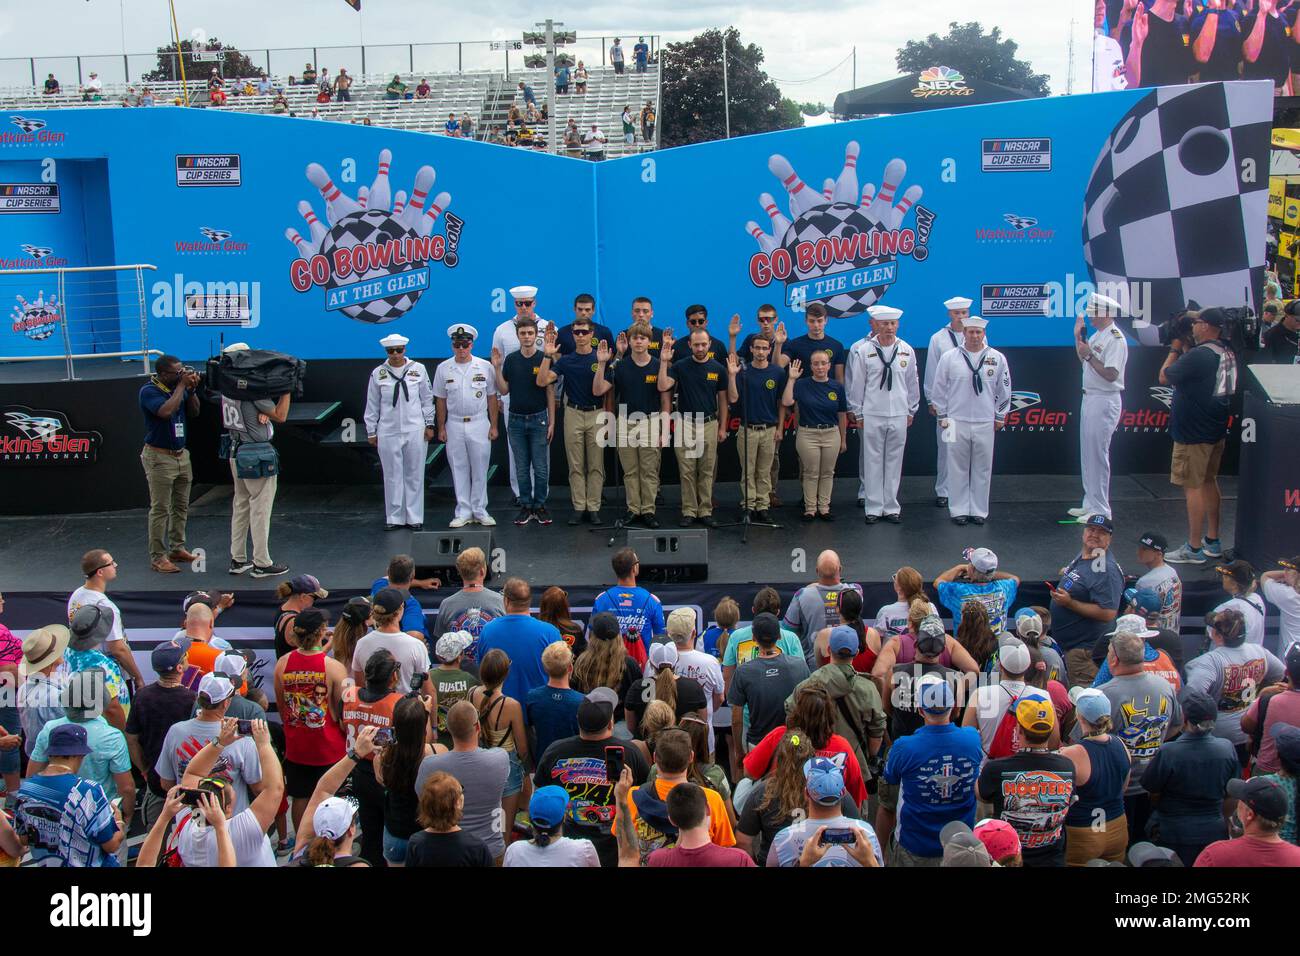 220821-N-RB168-0314 WATKINS GLEN, N.Y. (August 21, 2022) —  Eleven Future Sailors from Navy Talent Acquisition Group (NTAG) Pittsburgh take the oath of enlistment at the Go Bowling at the Watkins Glen NASCAR Xfinity Series race. Cmdr. Christopher McCurry, from Aloha, Ore., administered the oath. NTAG Pittsburgh, part of Navy Recruiting Command, recruits the next generation of Navy Sailors throughout areas in Pennsylvania, New York, West Virginia, and Maryland. Stock Photo